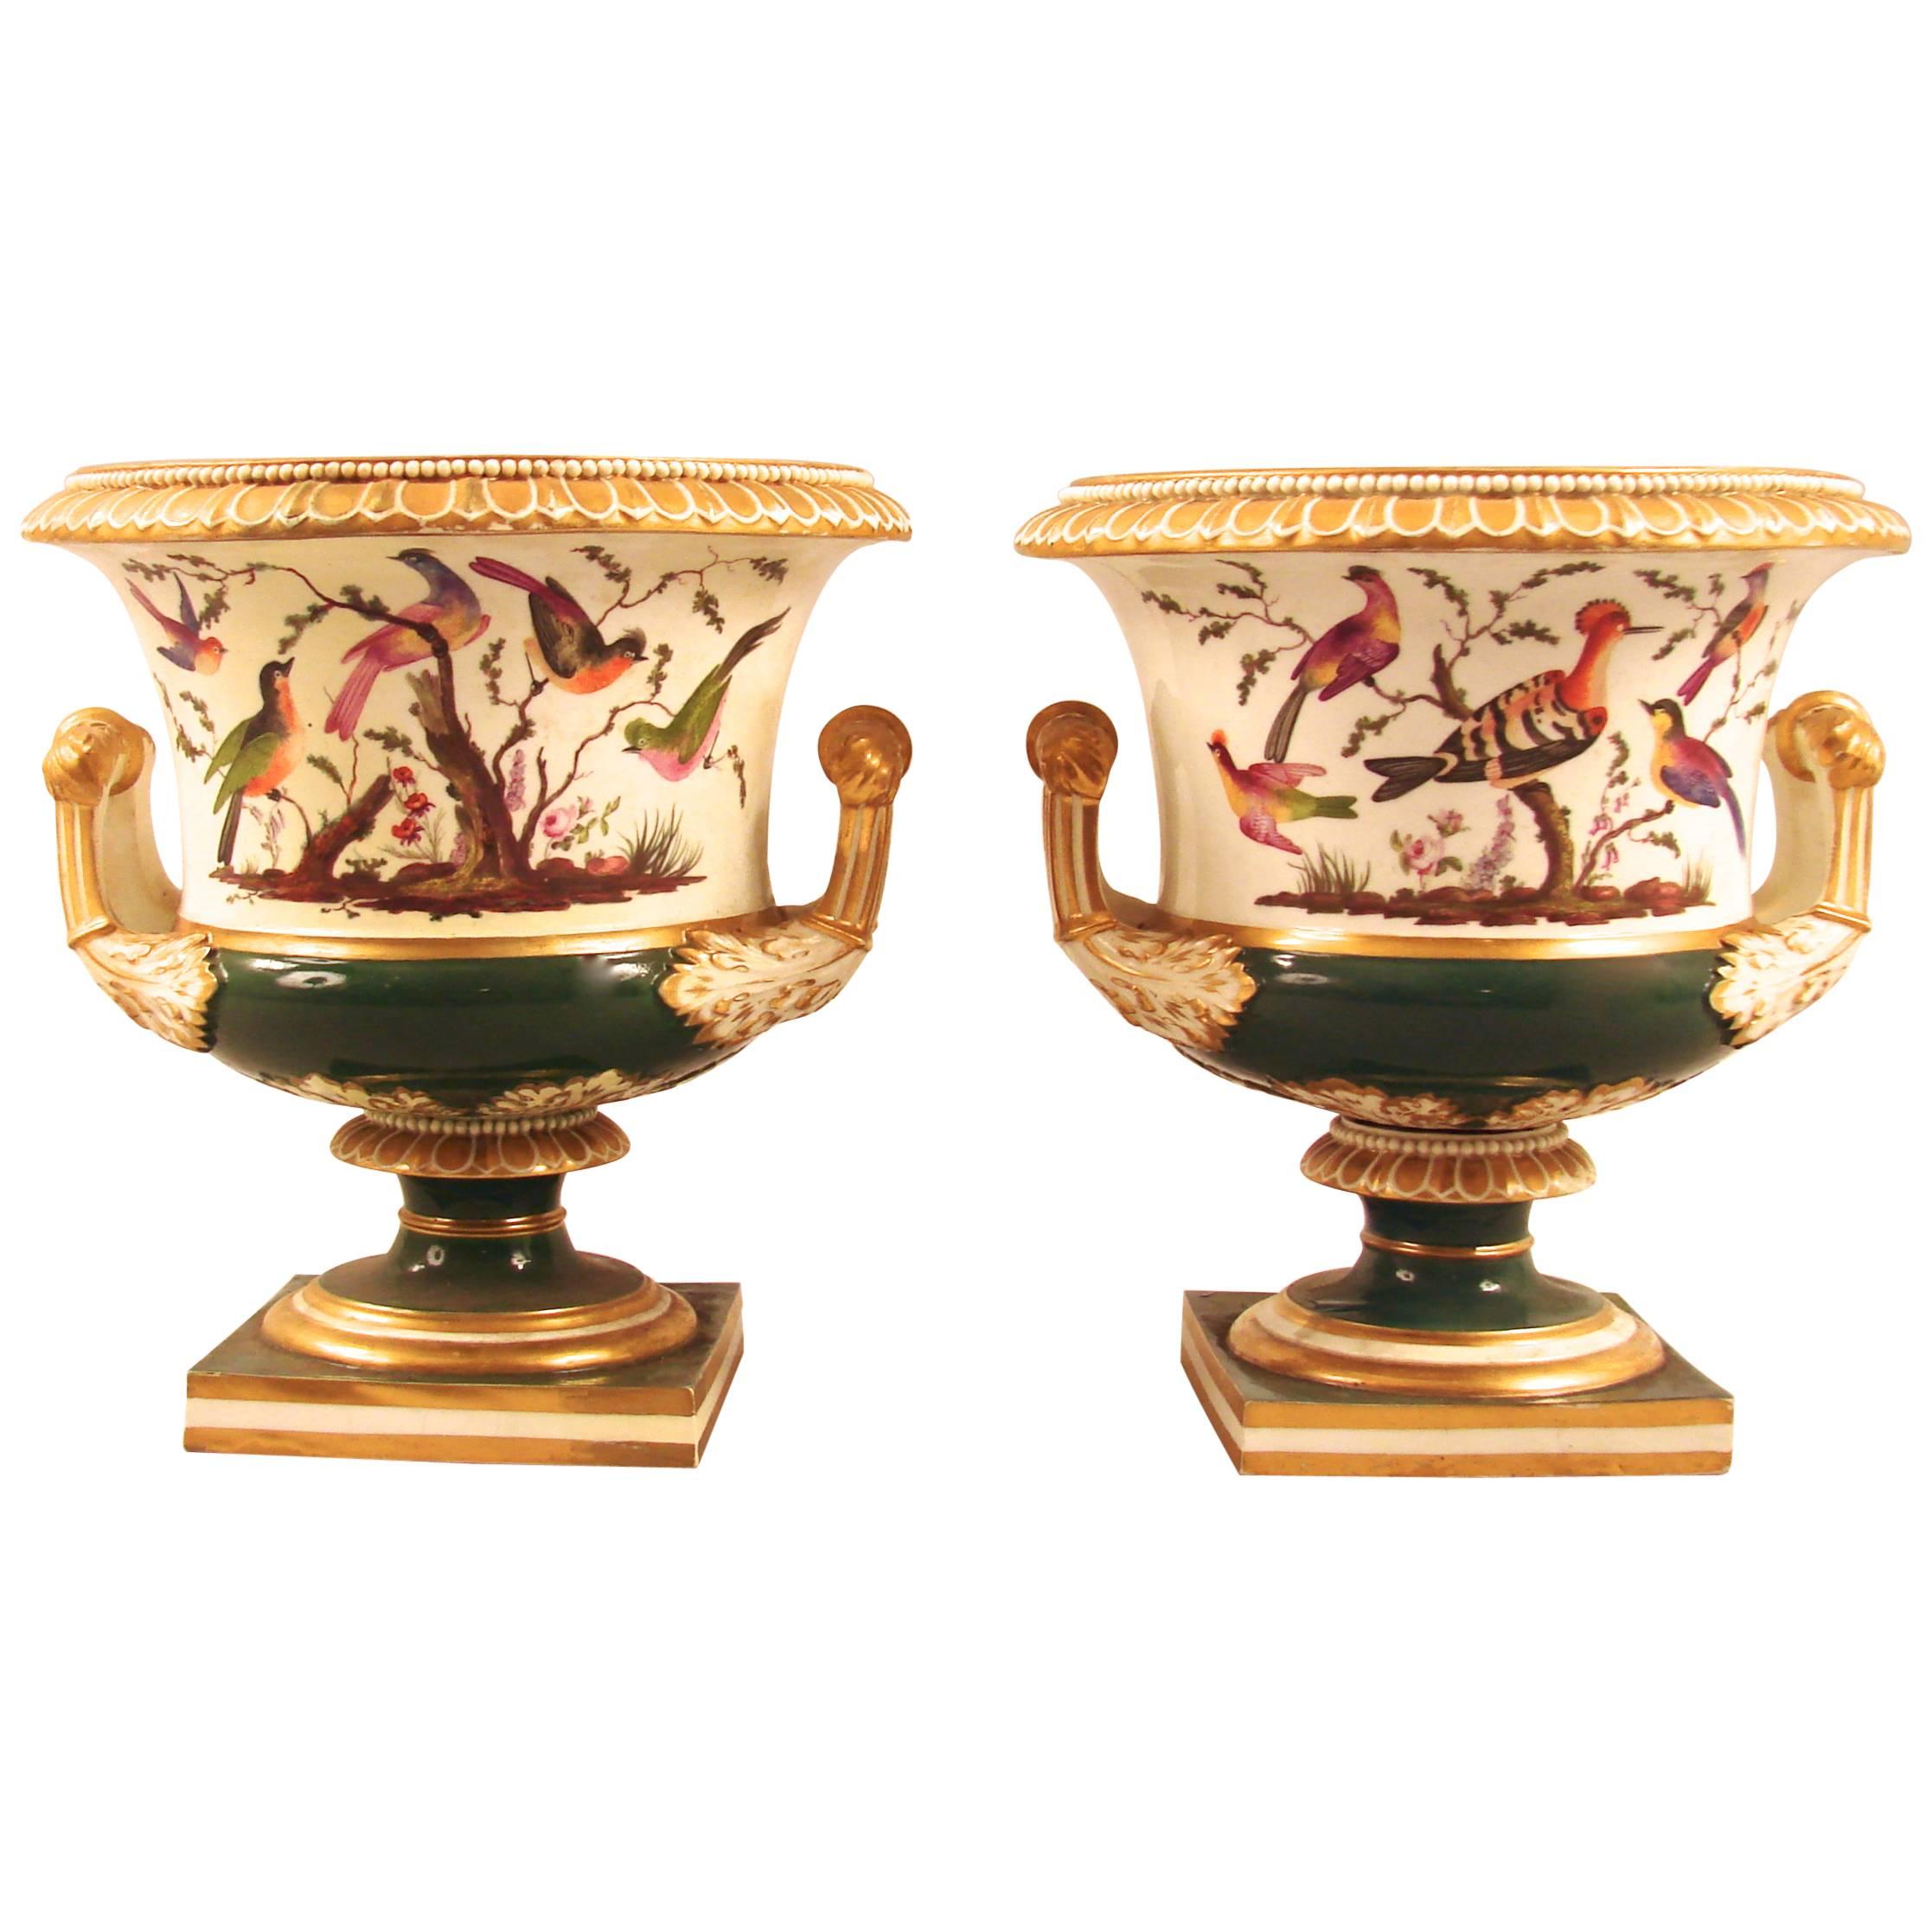 Pair of Bloor Bird Decorated Campagna Form Urns